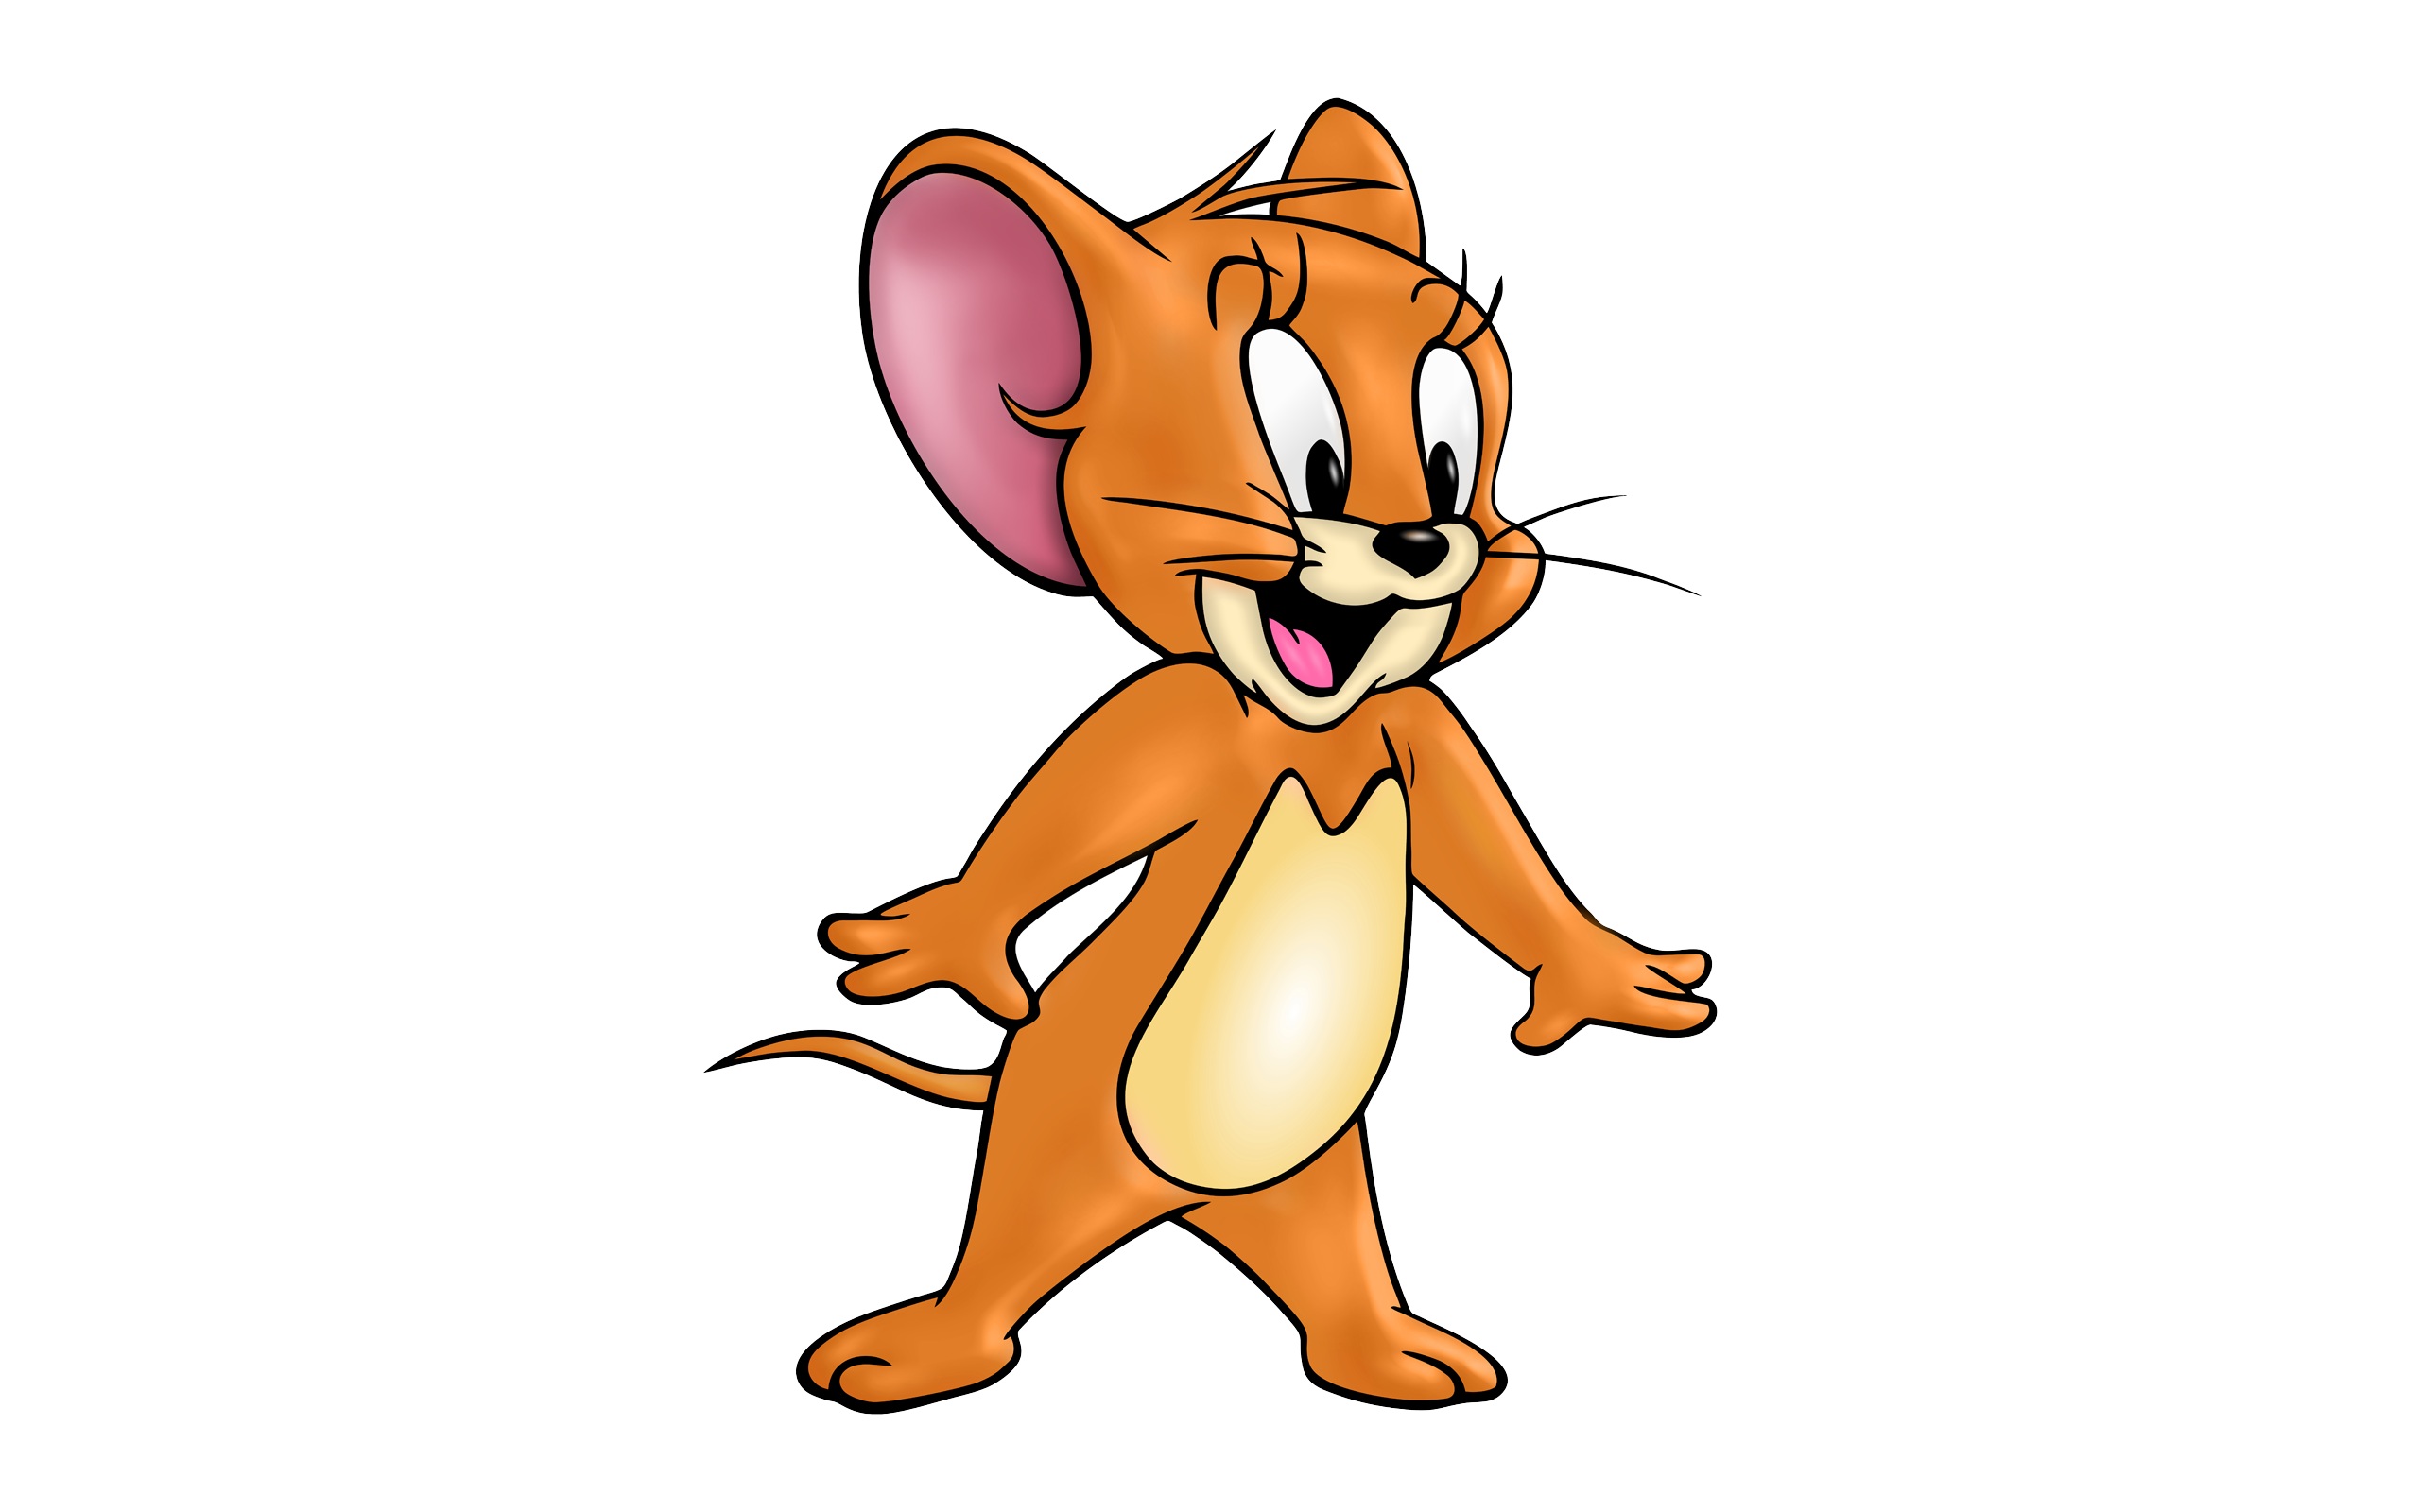 Jerry From Tom And Jerry (#91276) - HD Wallpaper & Backgrounds Download